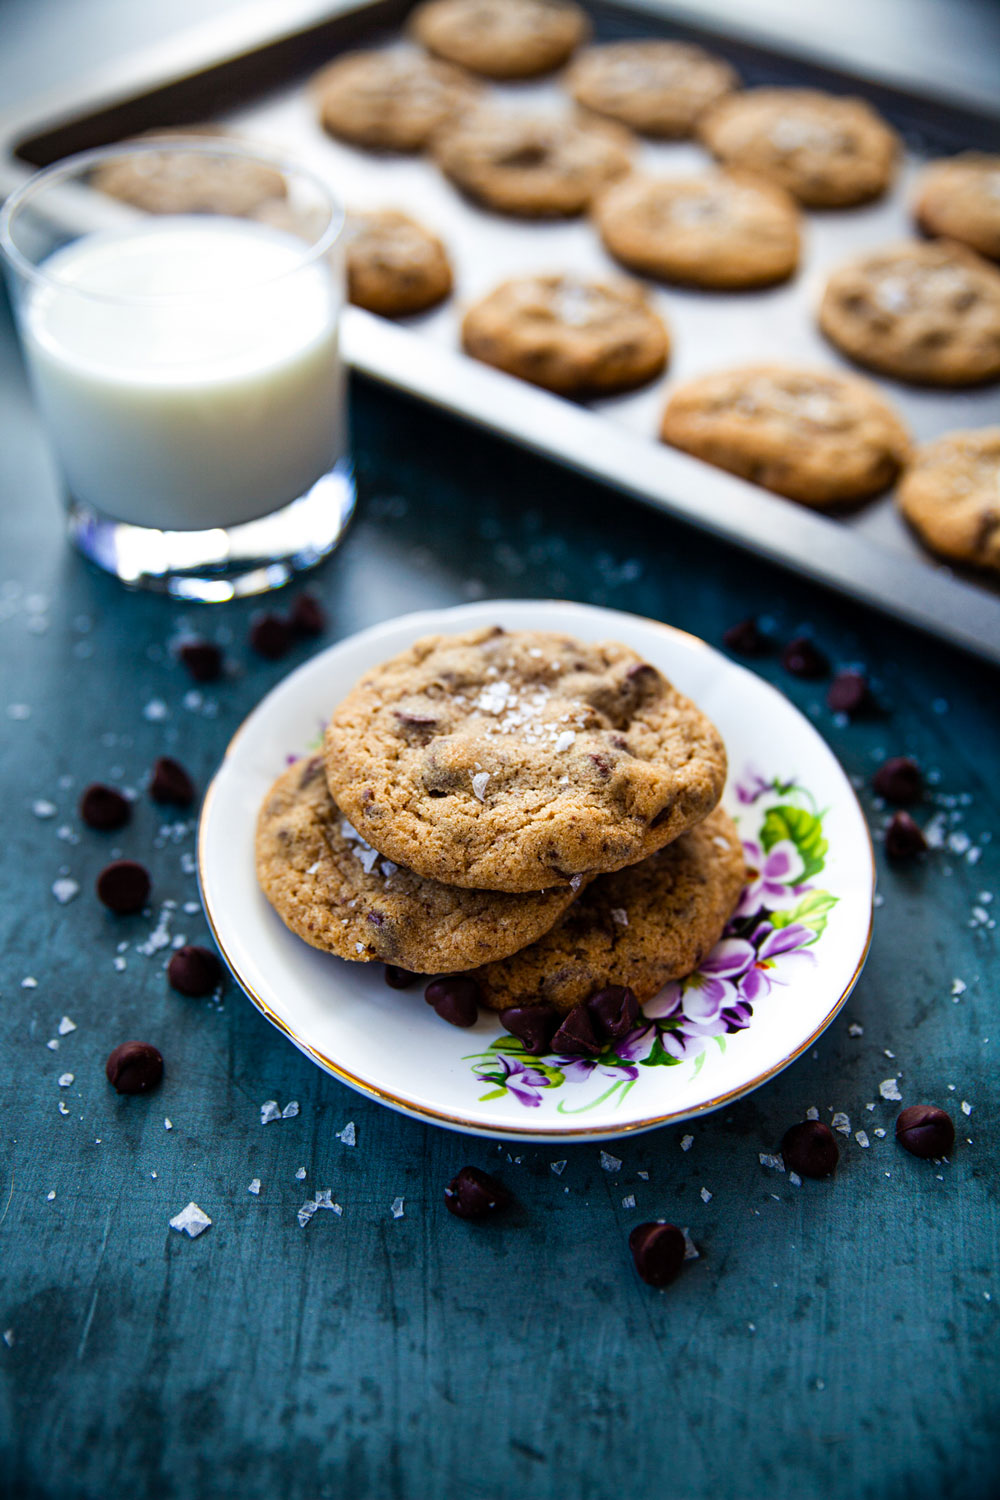 A small plate of cookies with a pinch of salt.